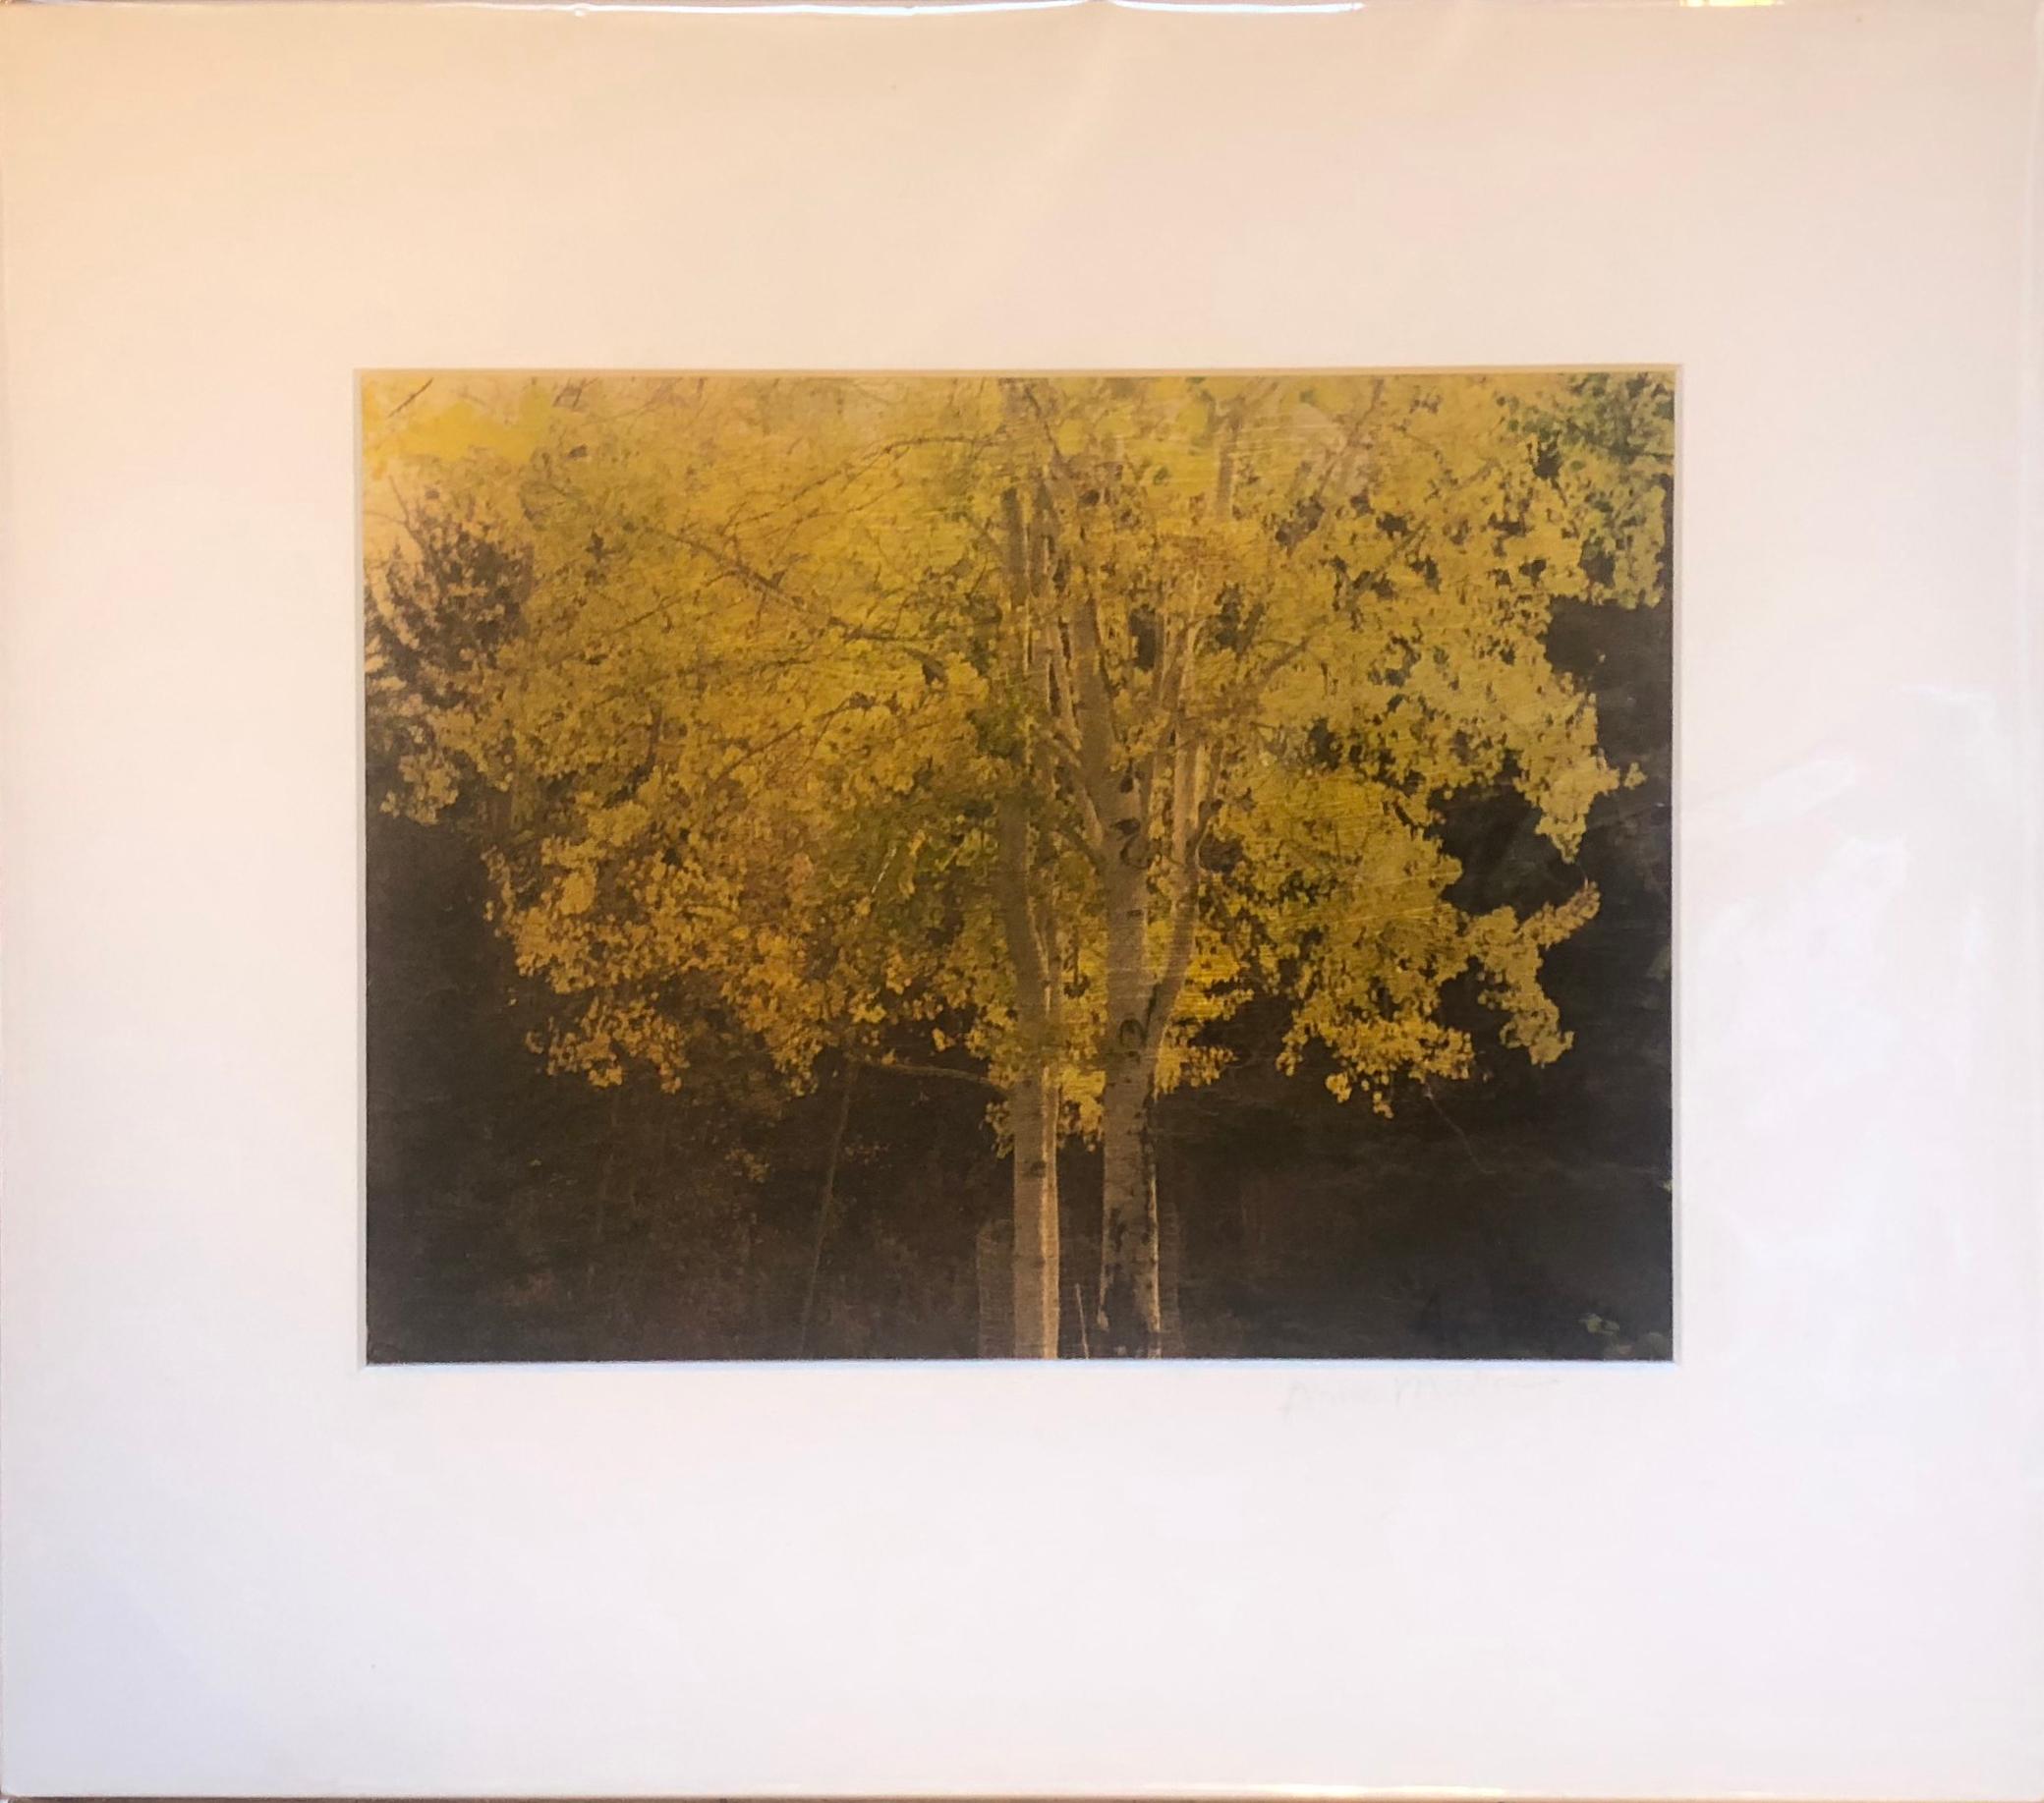 A horizontal photographic print on gold leaf and paper depicting a beautiful aspen tree by Anne Muller. In the Gold Series, Muller manipulates her photographs to emphasize the gold and metallic shades of nature, and individually transfers them onto